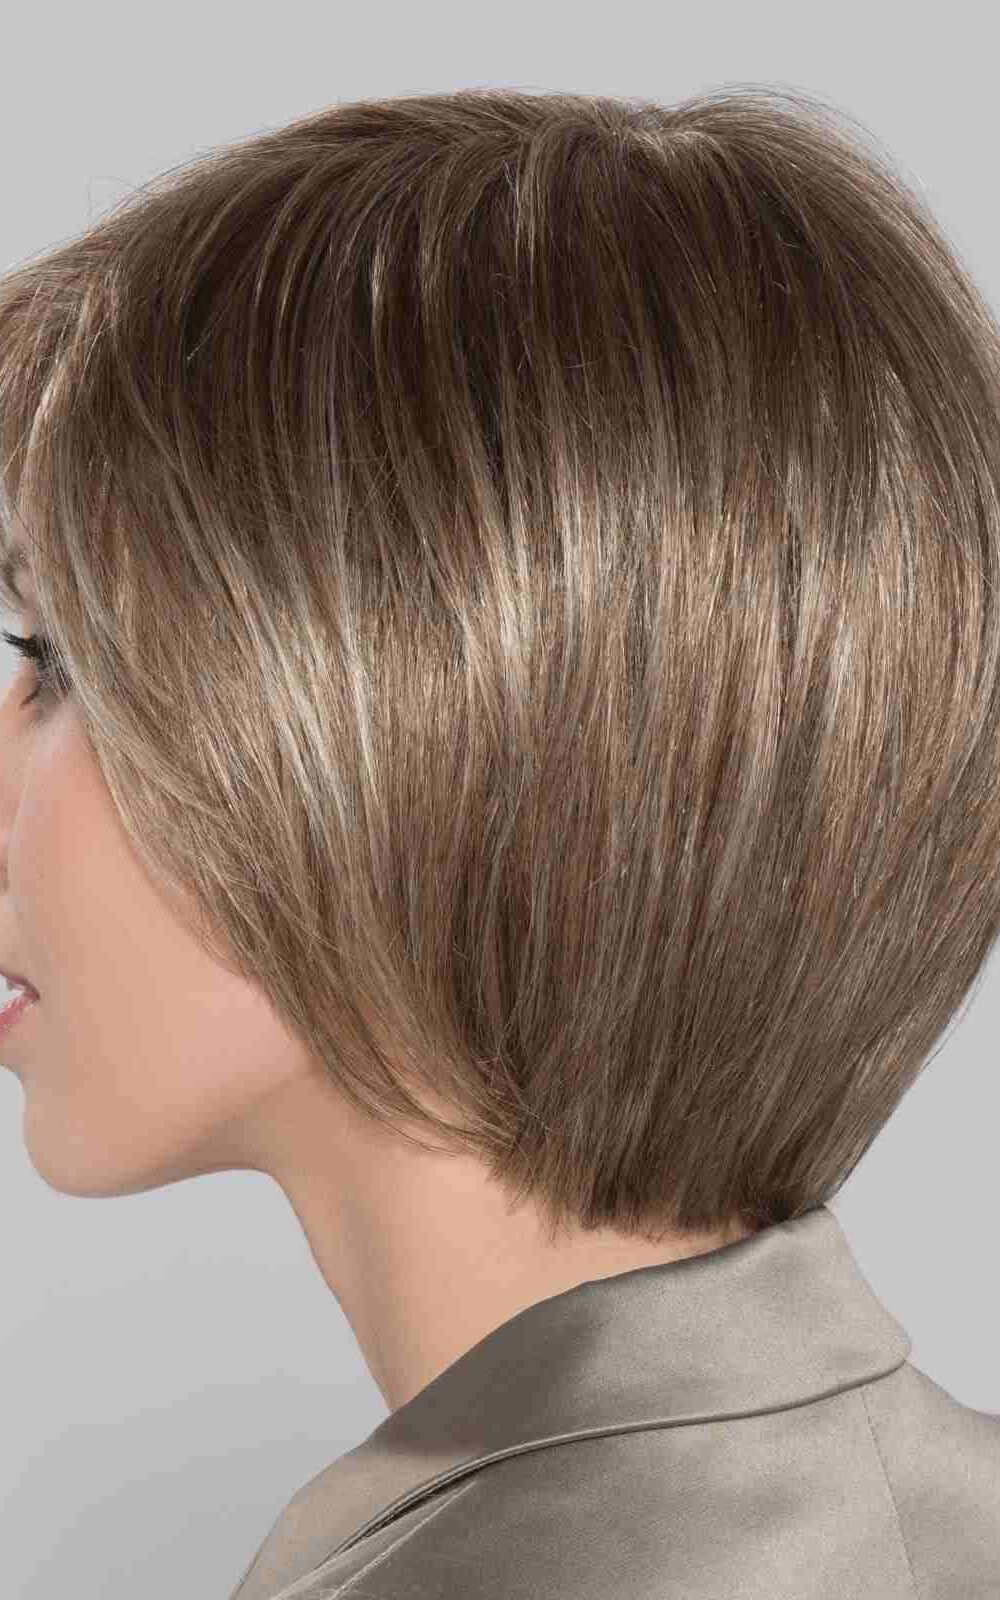 Shine Comfort Wig by Ellen Wille is a shorter length bob.  With a 100% hand-tied cap and a fine elastic tulle crown